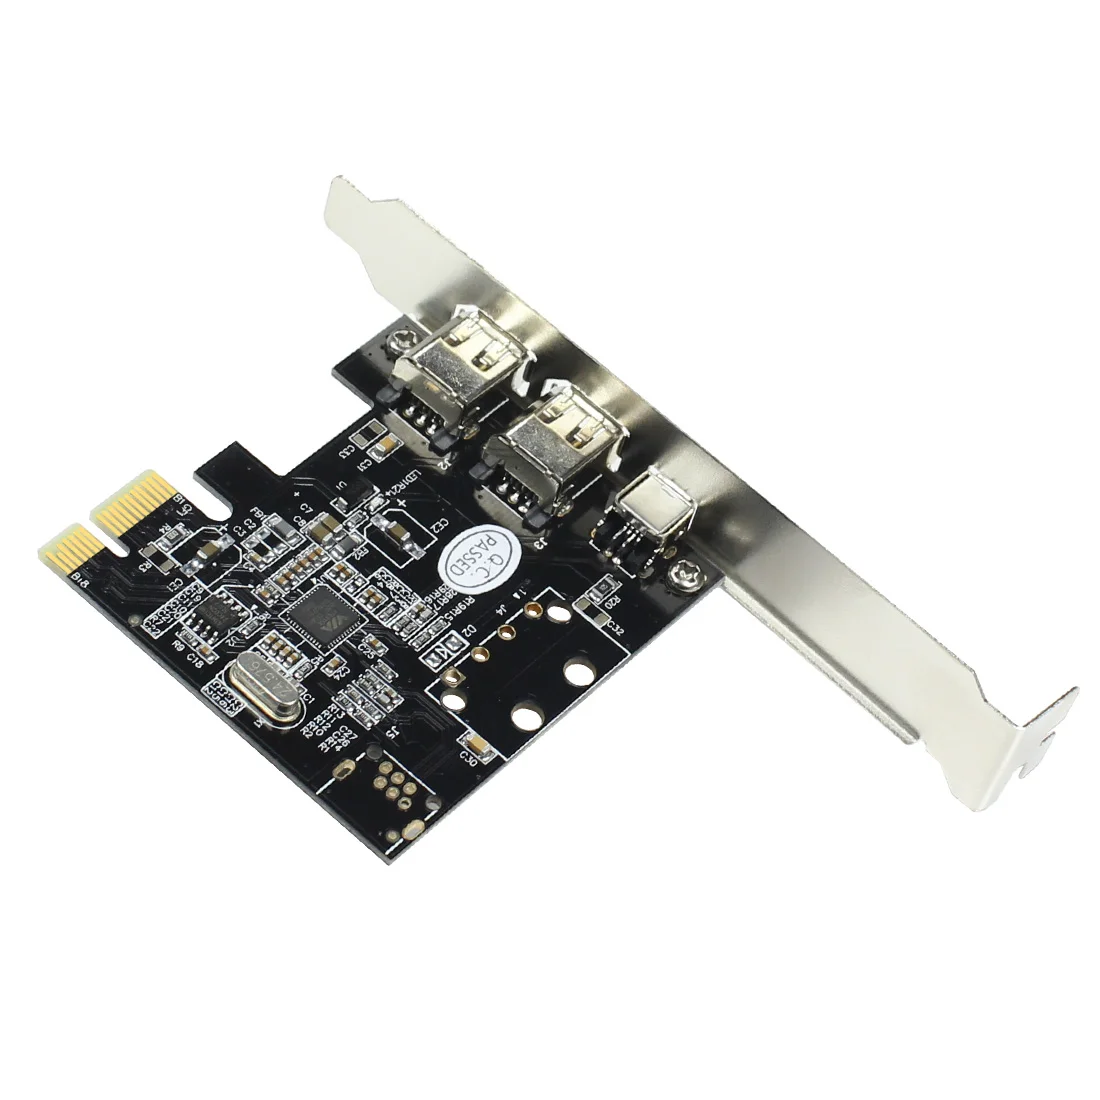 

XT-XINTE PCIe 3Ports 1394A Firewire Expansion Card PCI Express to IEEE 1394 Adapter Controller Card 2 x 6Pin And 1 x 4Pin for PC